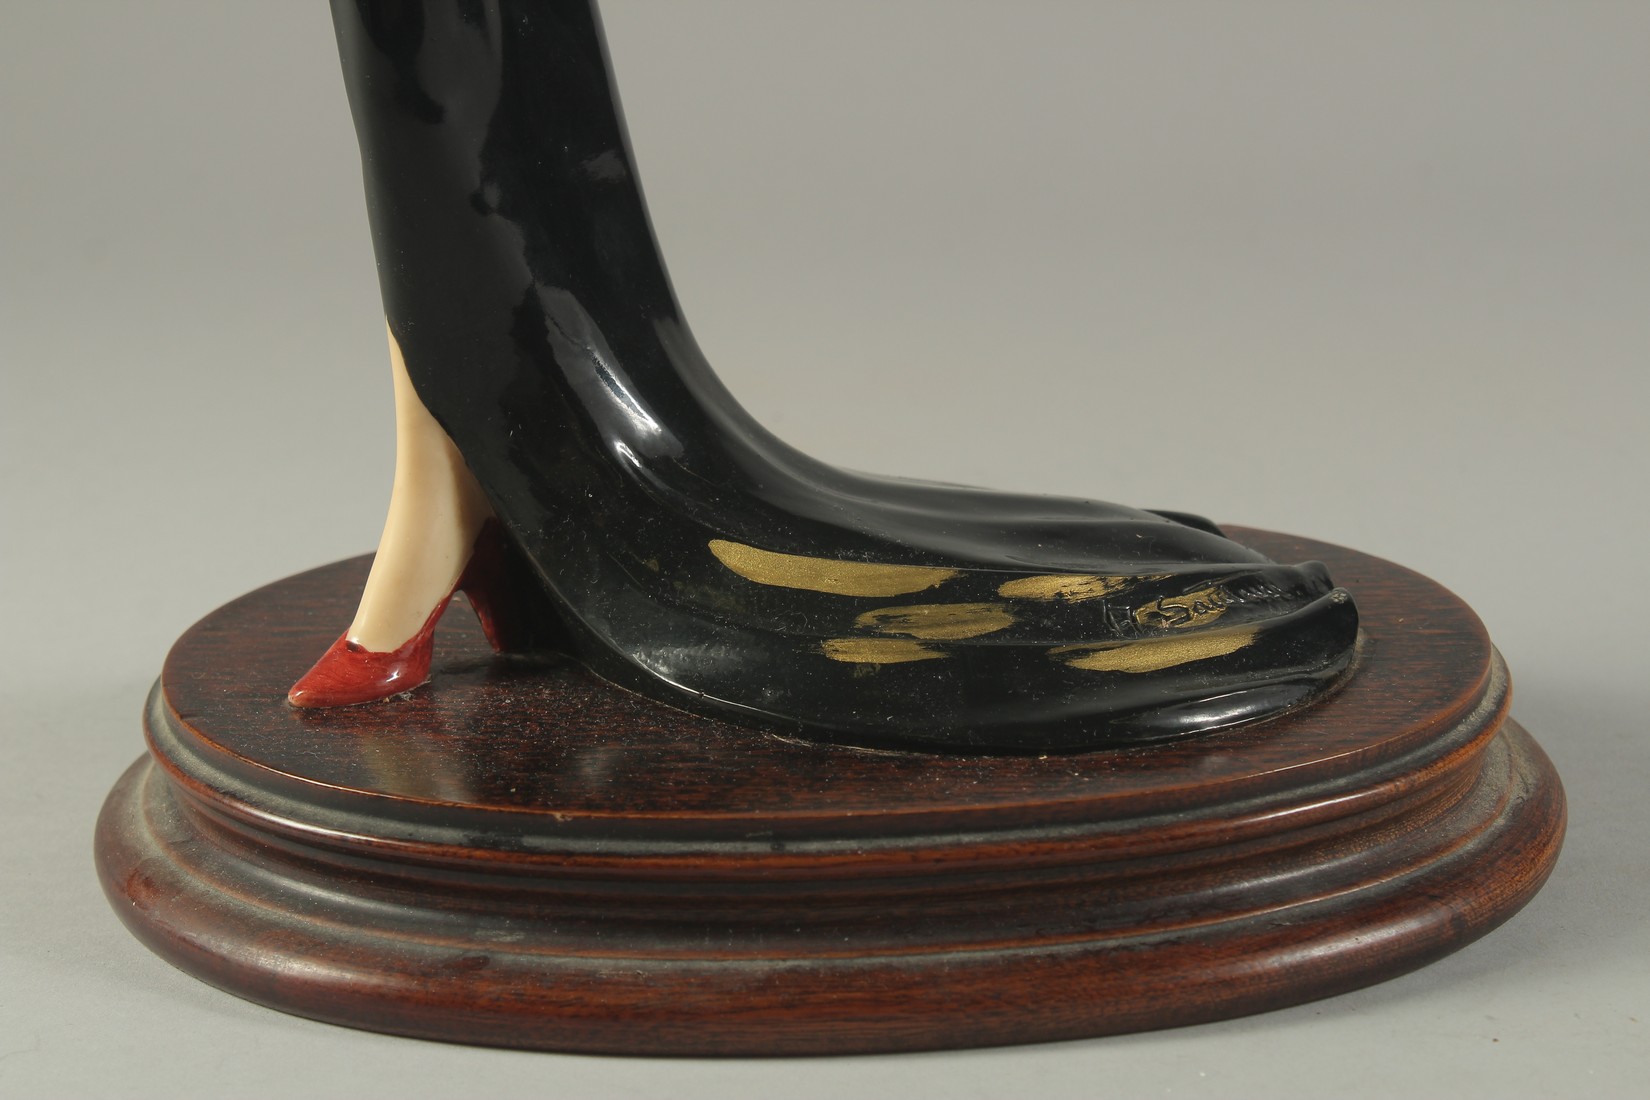 AMILCARE SANTINI (1910 - 1973) ITALIAN. AN ART DECO PORCELAIN LADY in a black dress. 17ins high. - Image 5 of 9